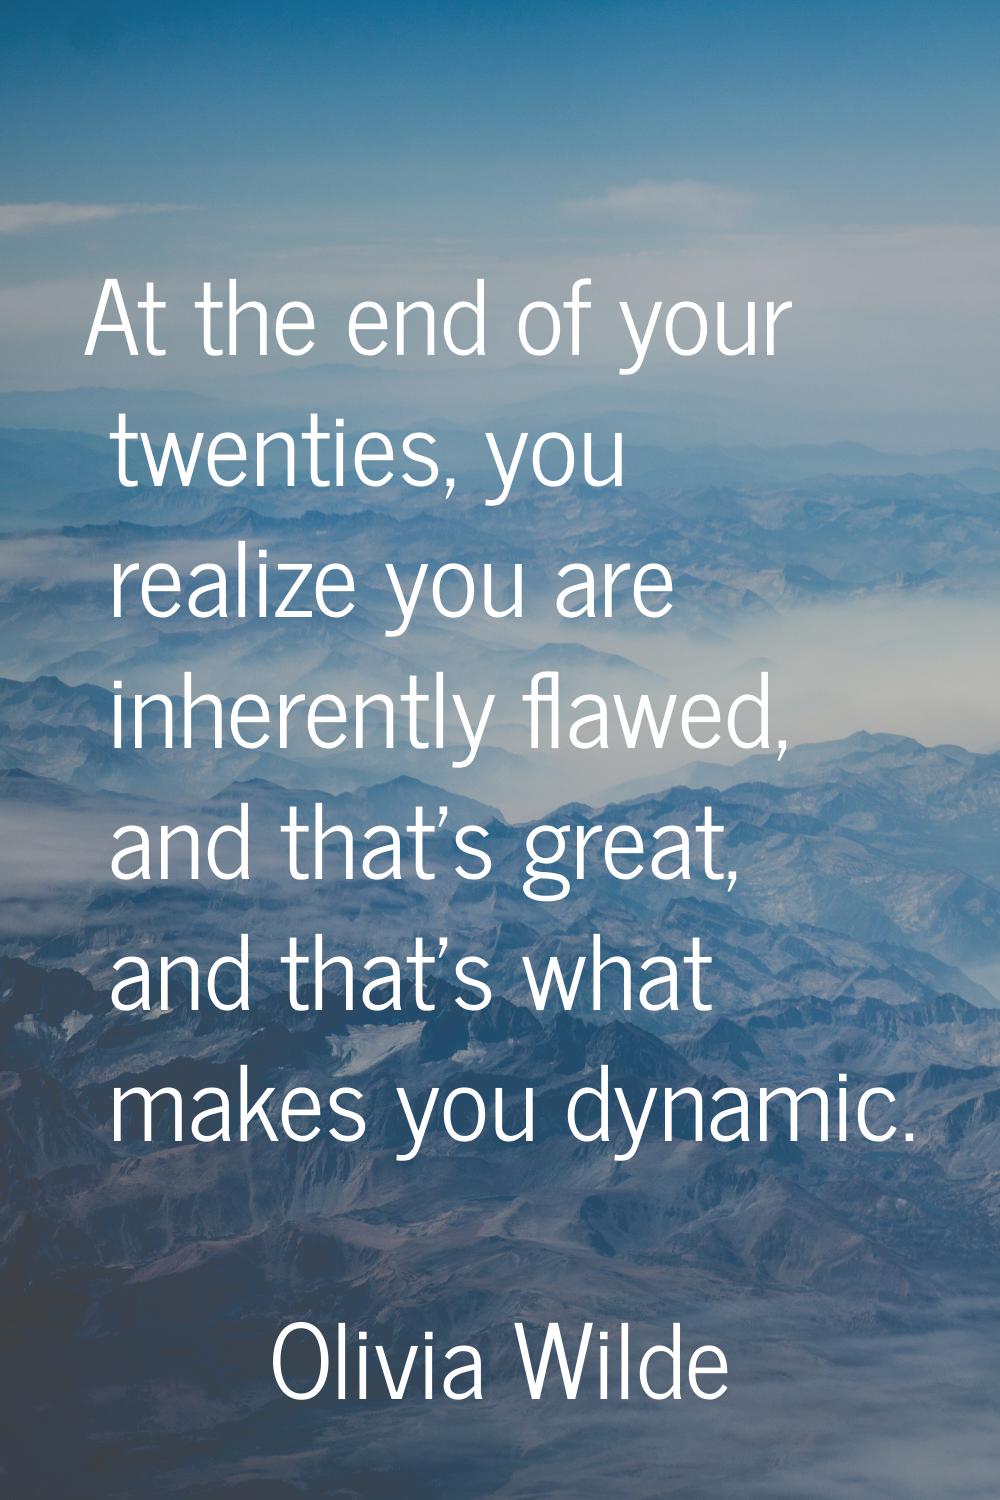 At the end of your twenties, you realize you are inherently flawed, and that's great, and that's wh